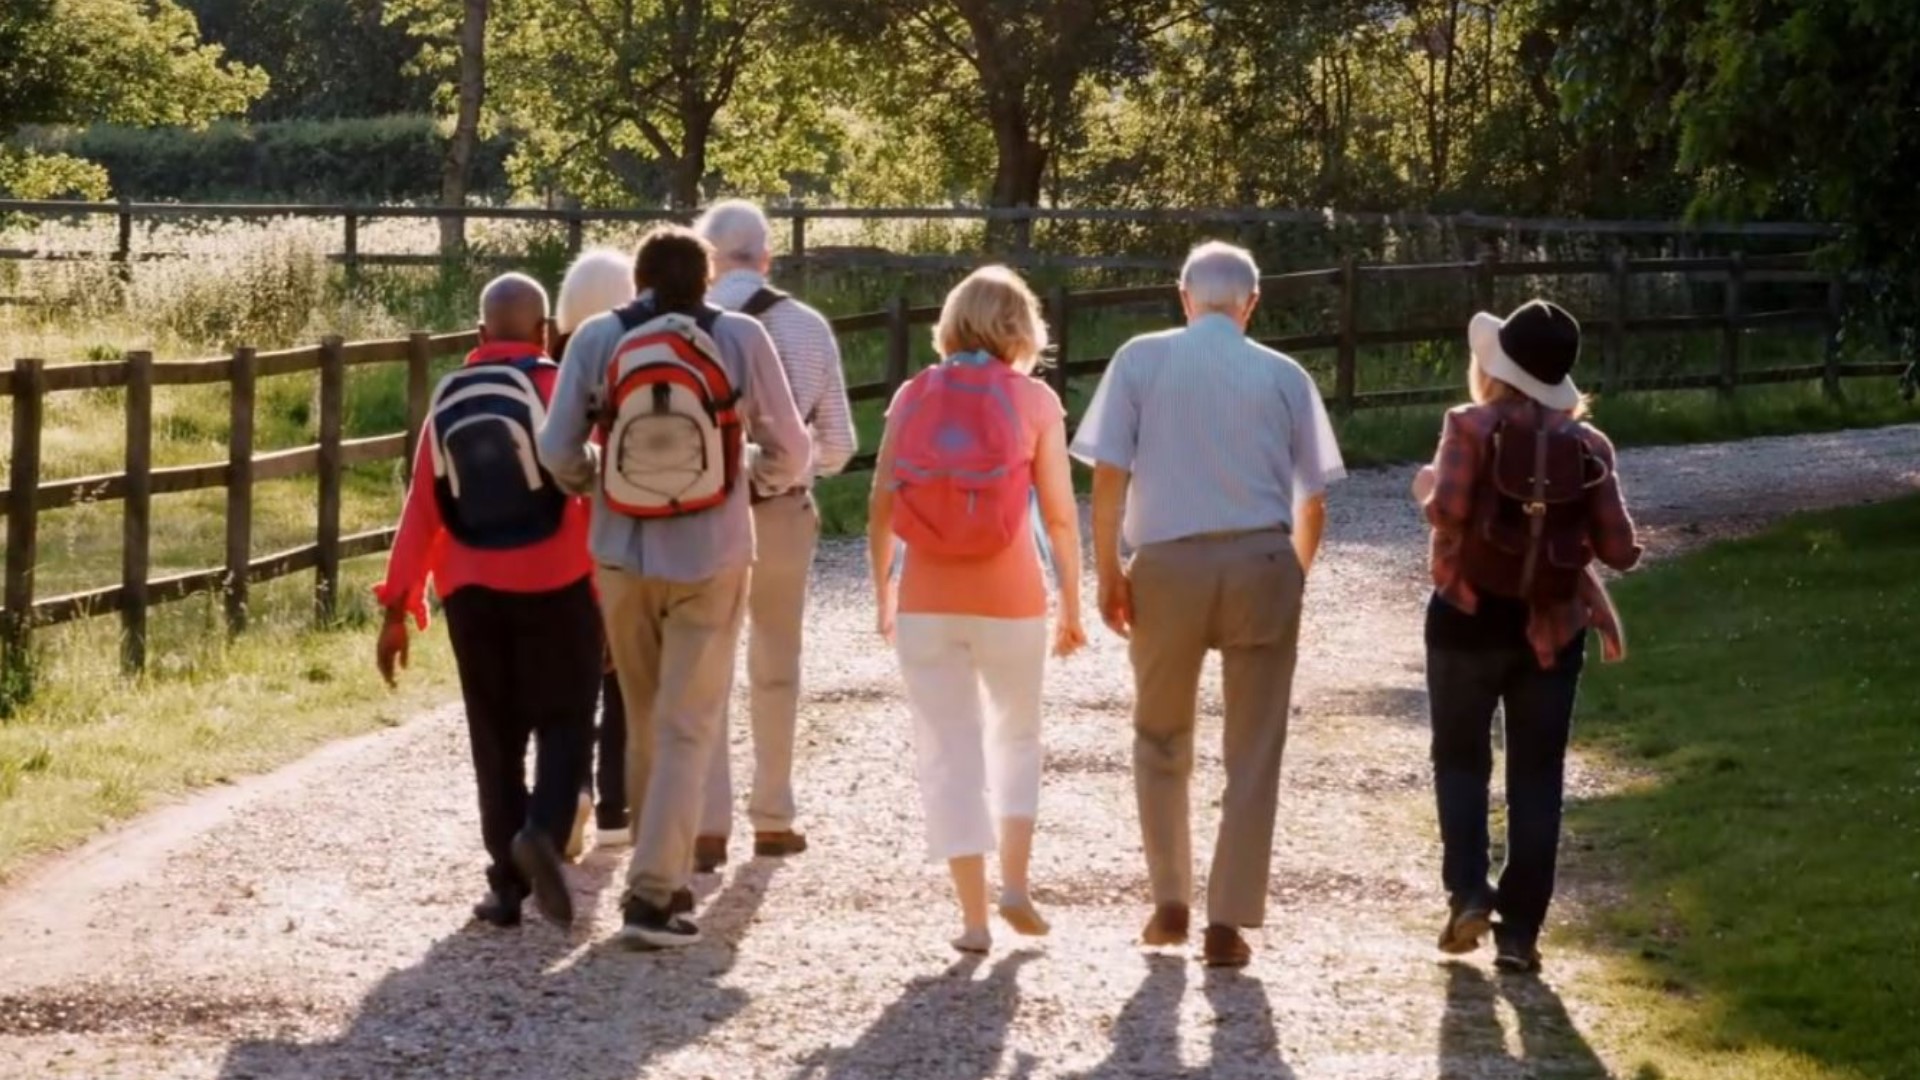 According to a new study, the Keystone State is popular for retirees who want to stay active.